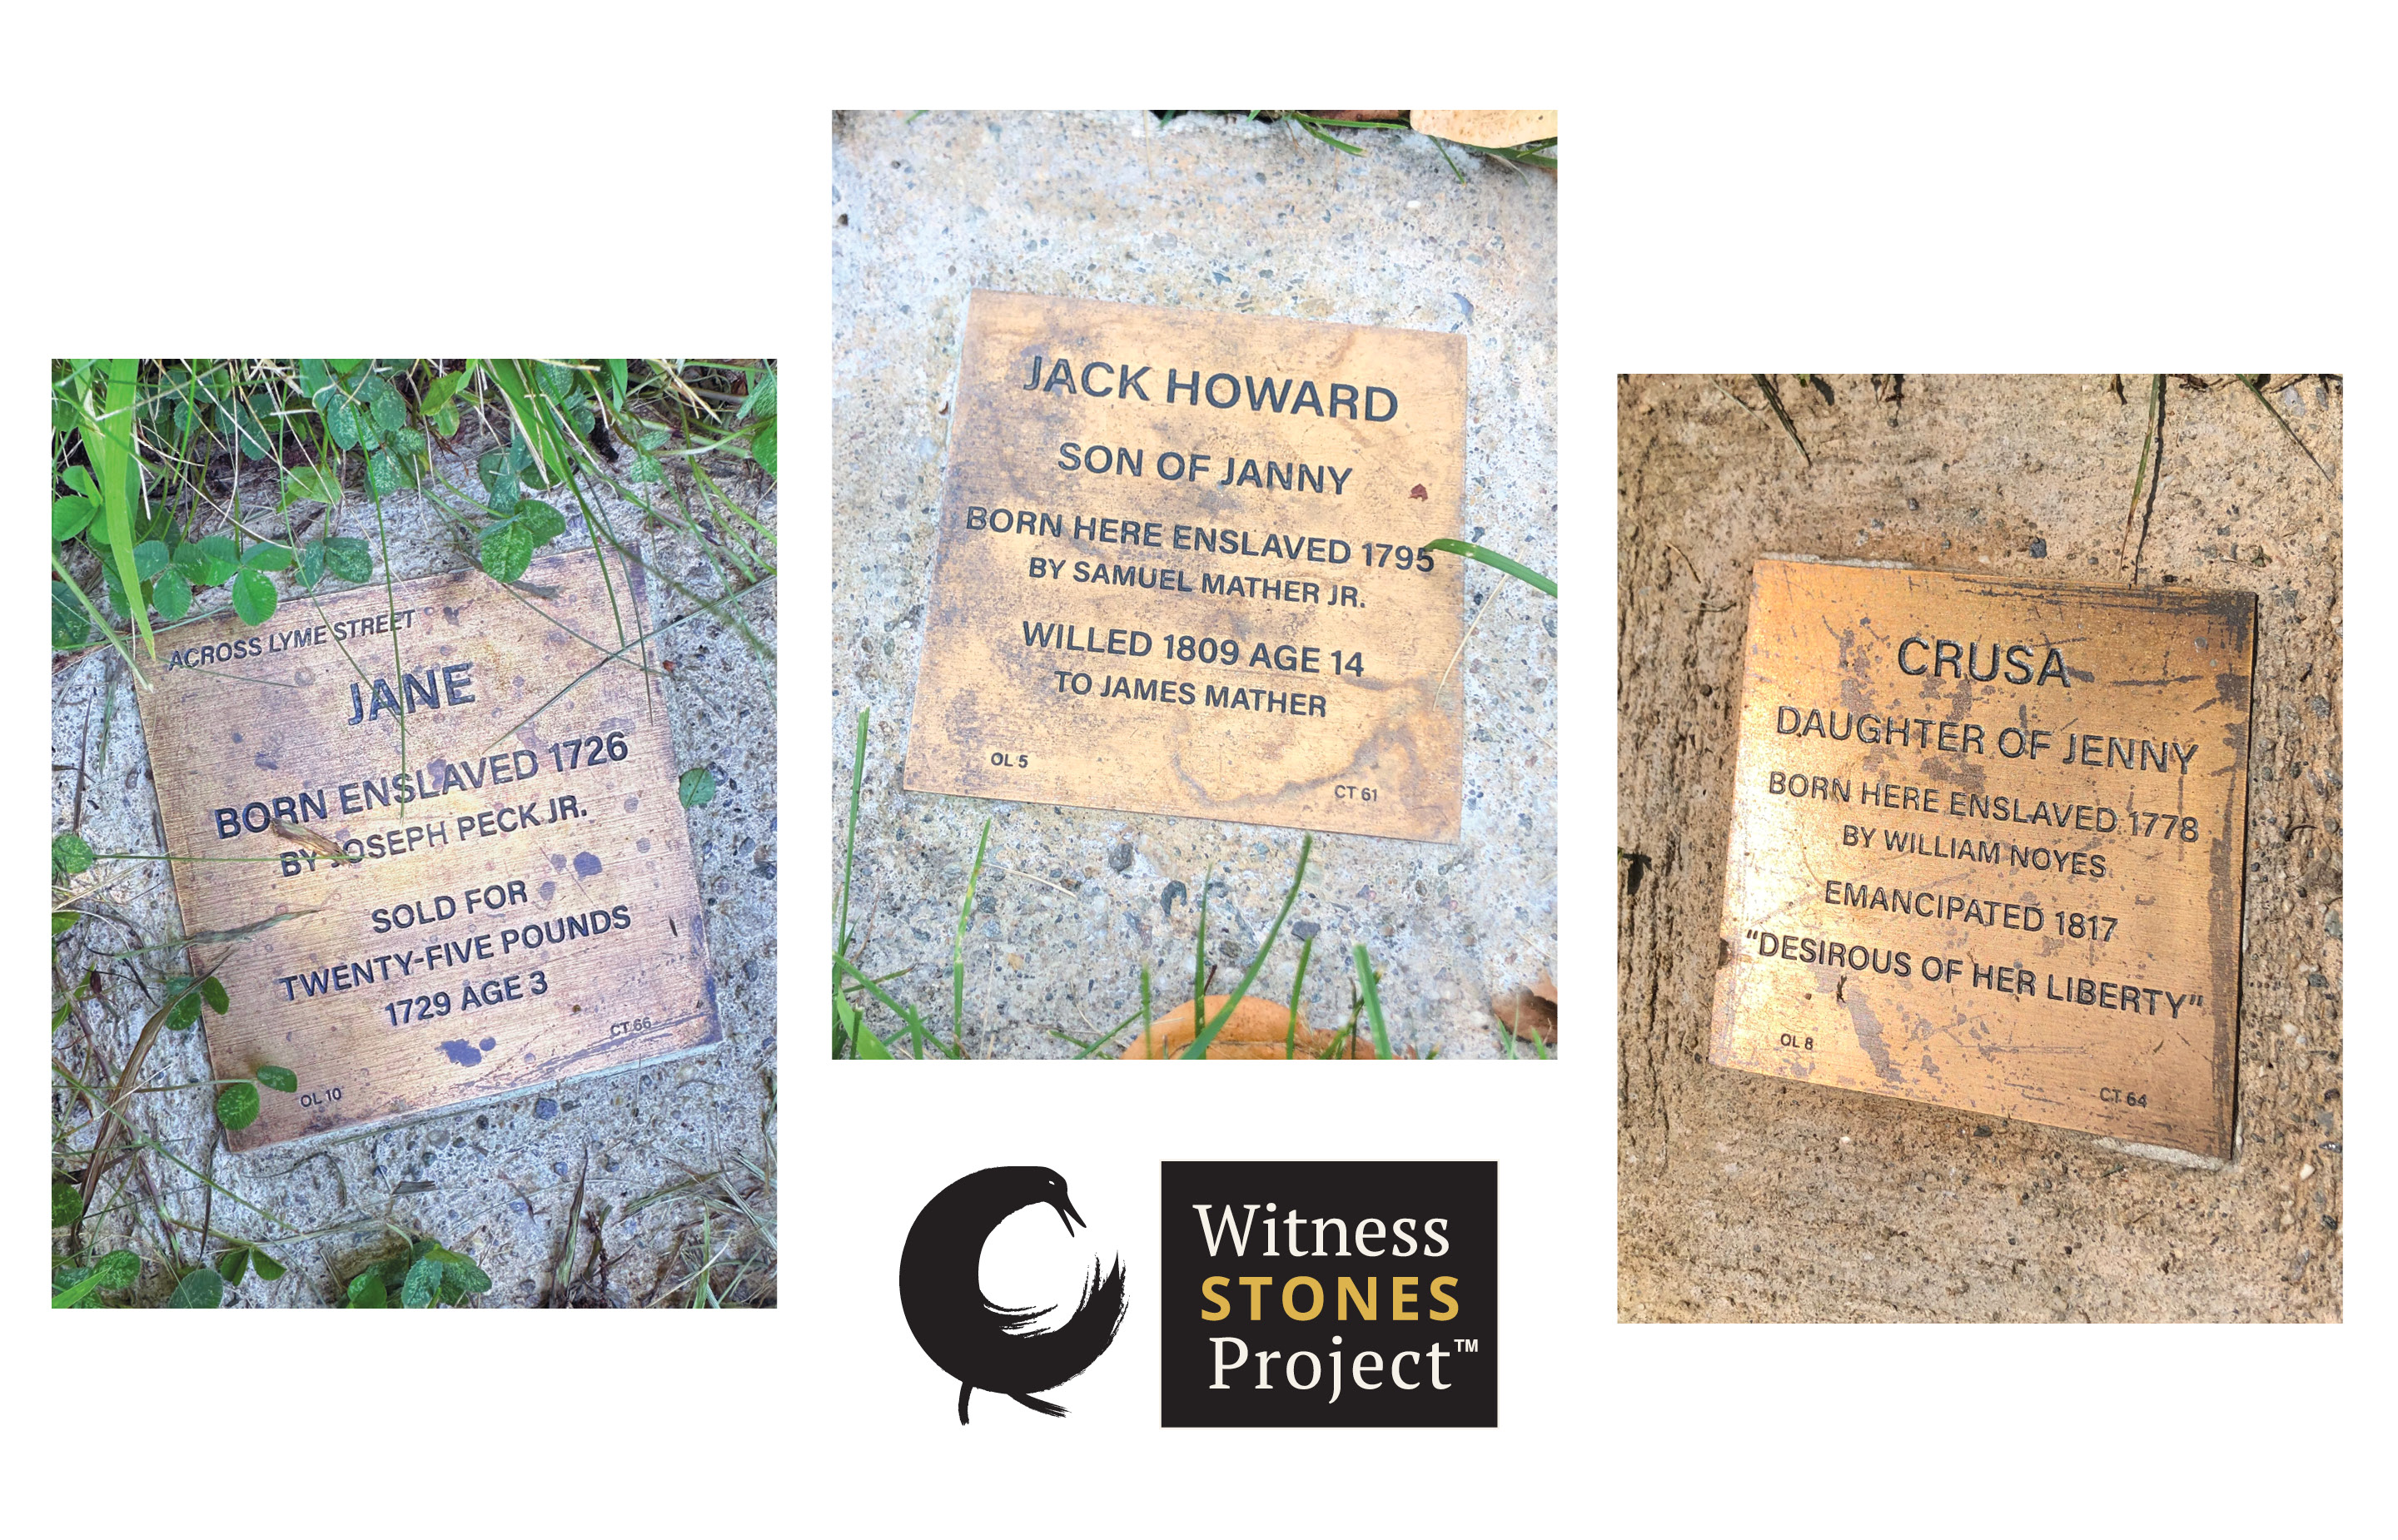 Witness stone markers in Old Lyme, CT.